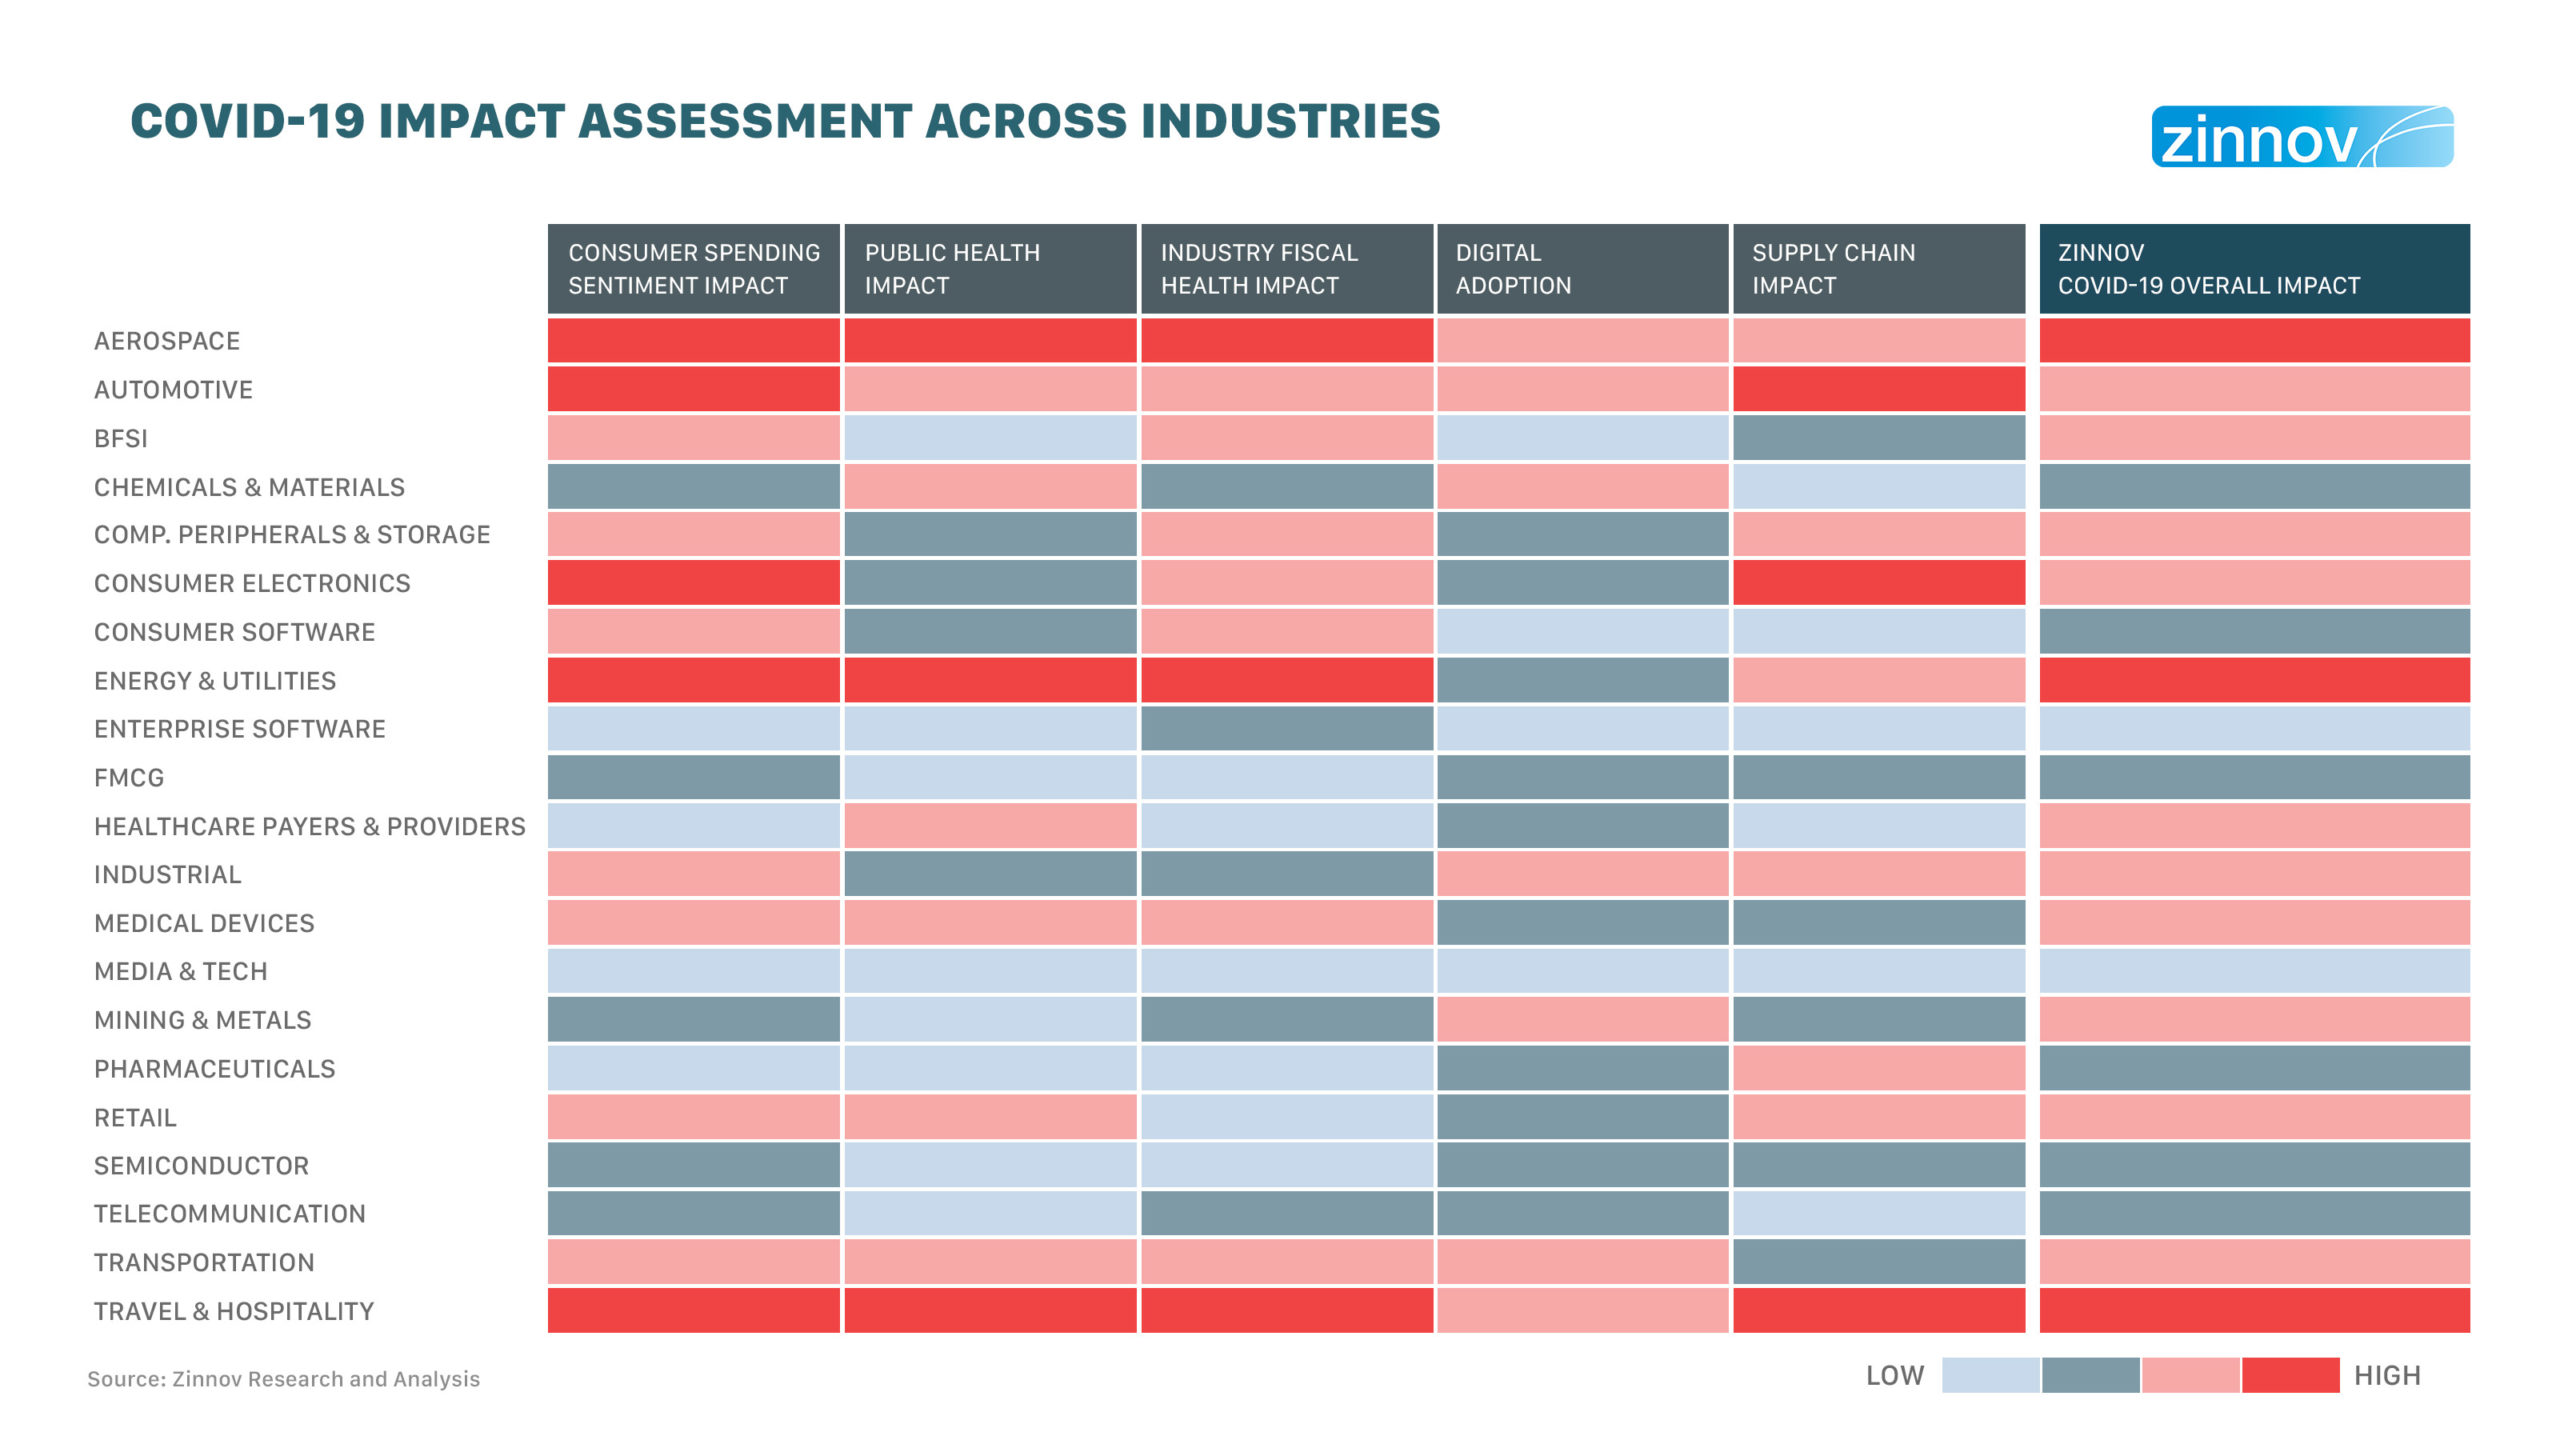 COVID-19 impact assessment across industries